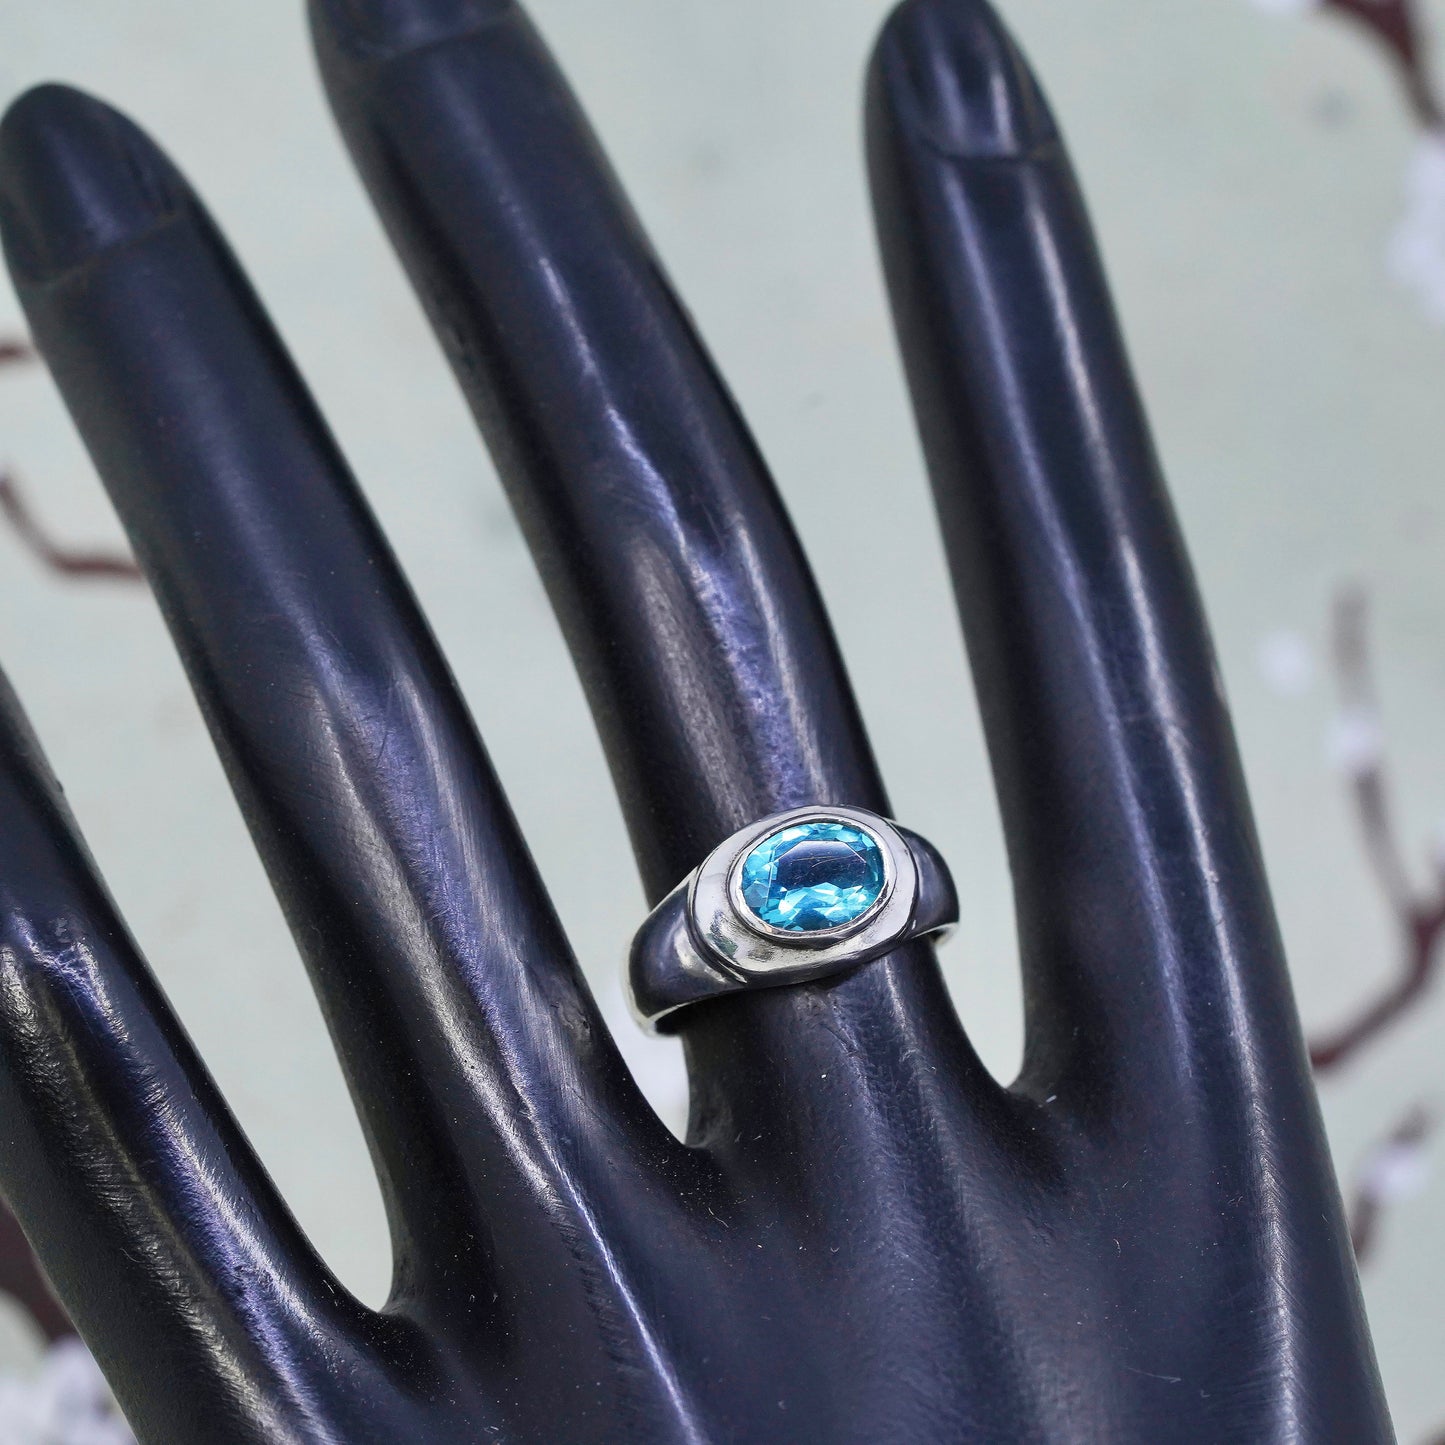 Size 7, vintage Sterling silver statement ring, 925 band with oval blue topaz